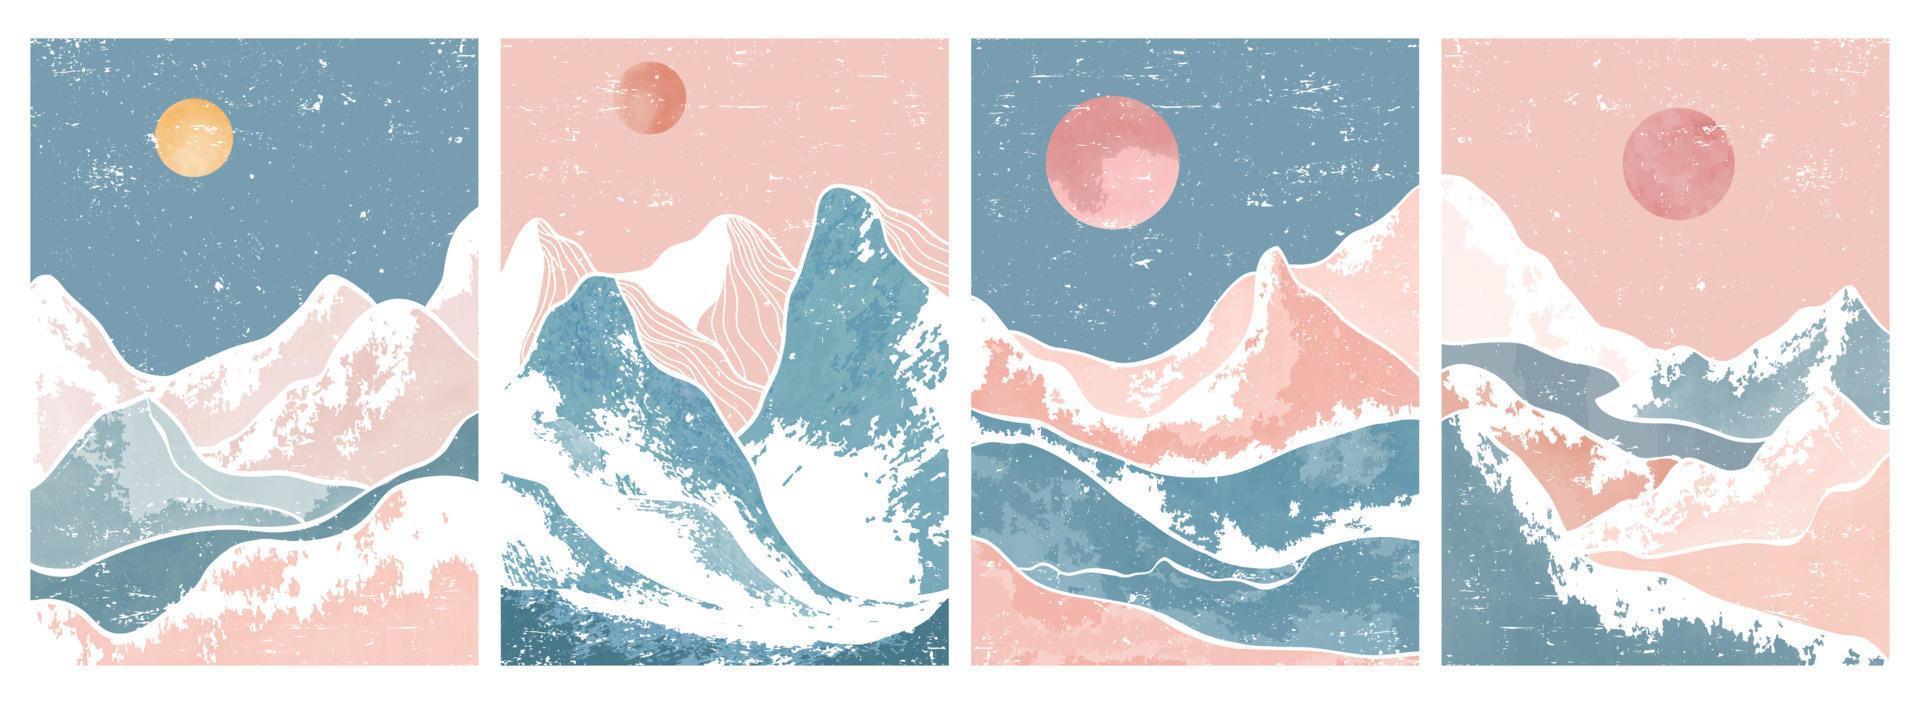 Mid century modern minimalist art print on set. Abstract mountain contemporary aesthetic backgrounds landscapes. vector illustrations